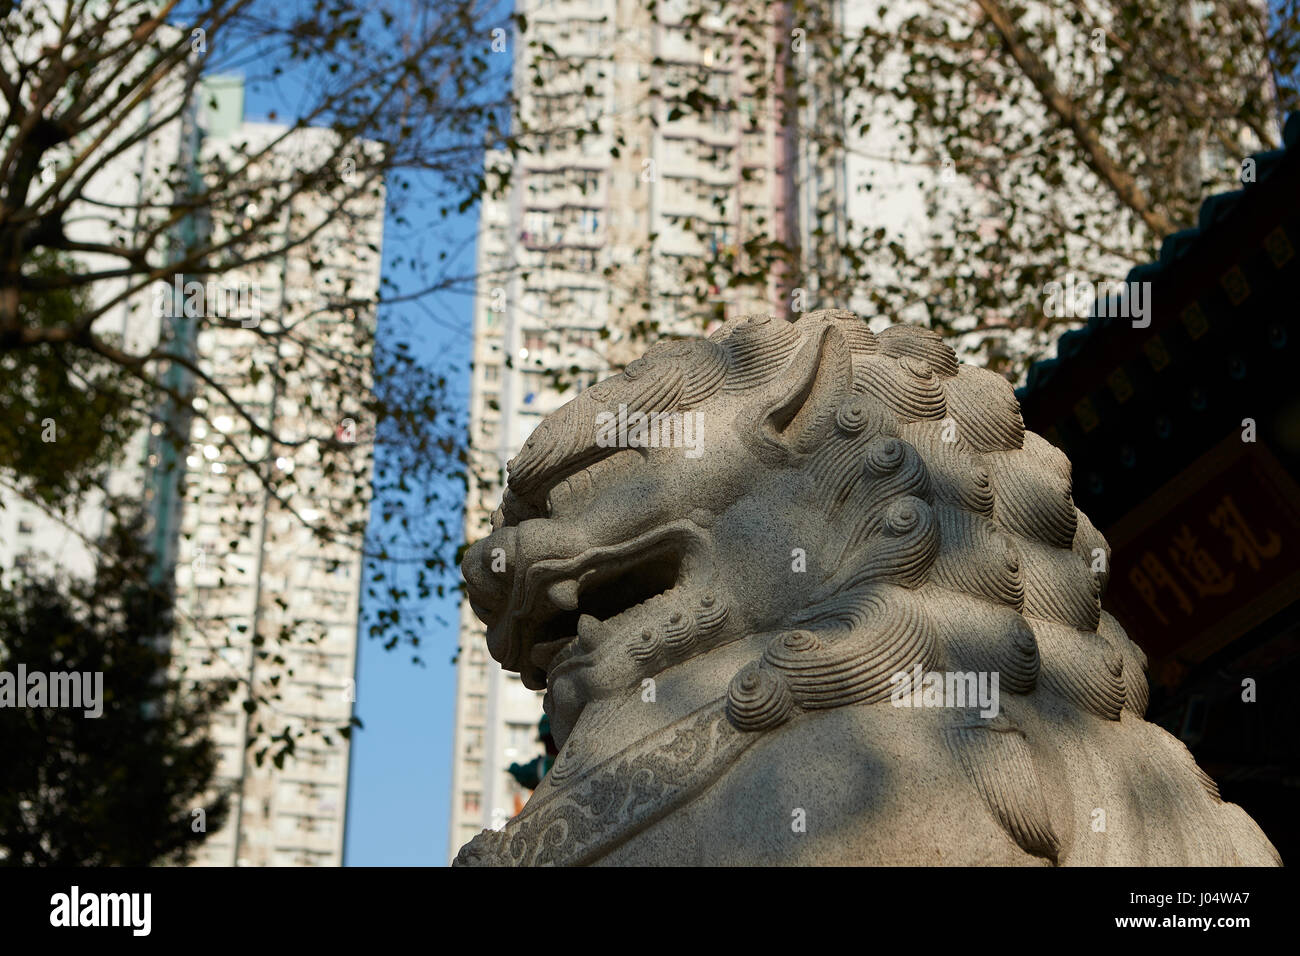 Fierce Chinese Mythical Creature Overlooked By High Rise Apartment Buildings At The Wong Tai Sin Temple, Hong Kong. Stock Photo